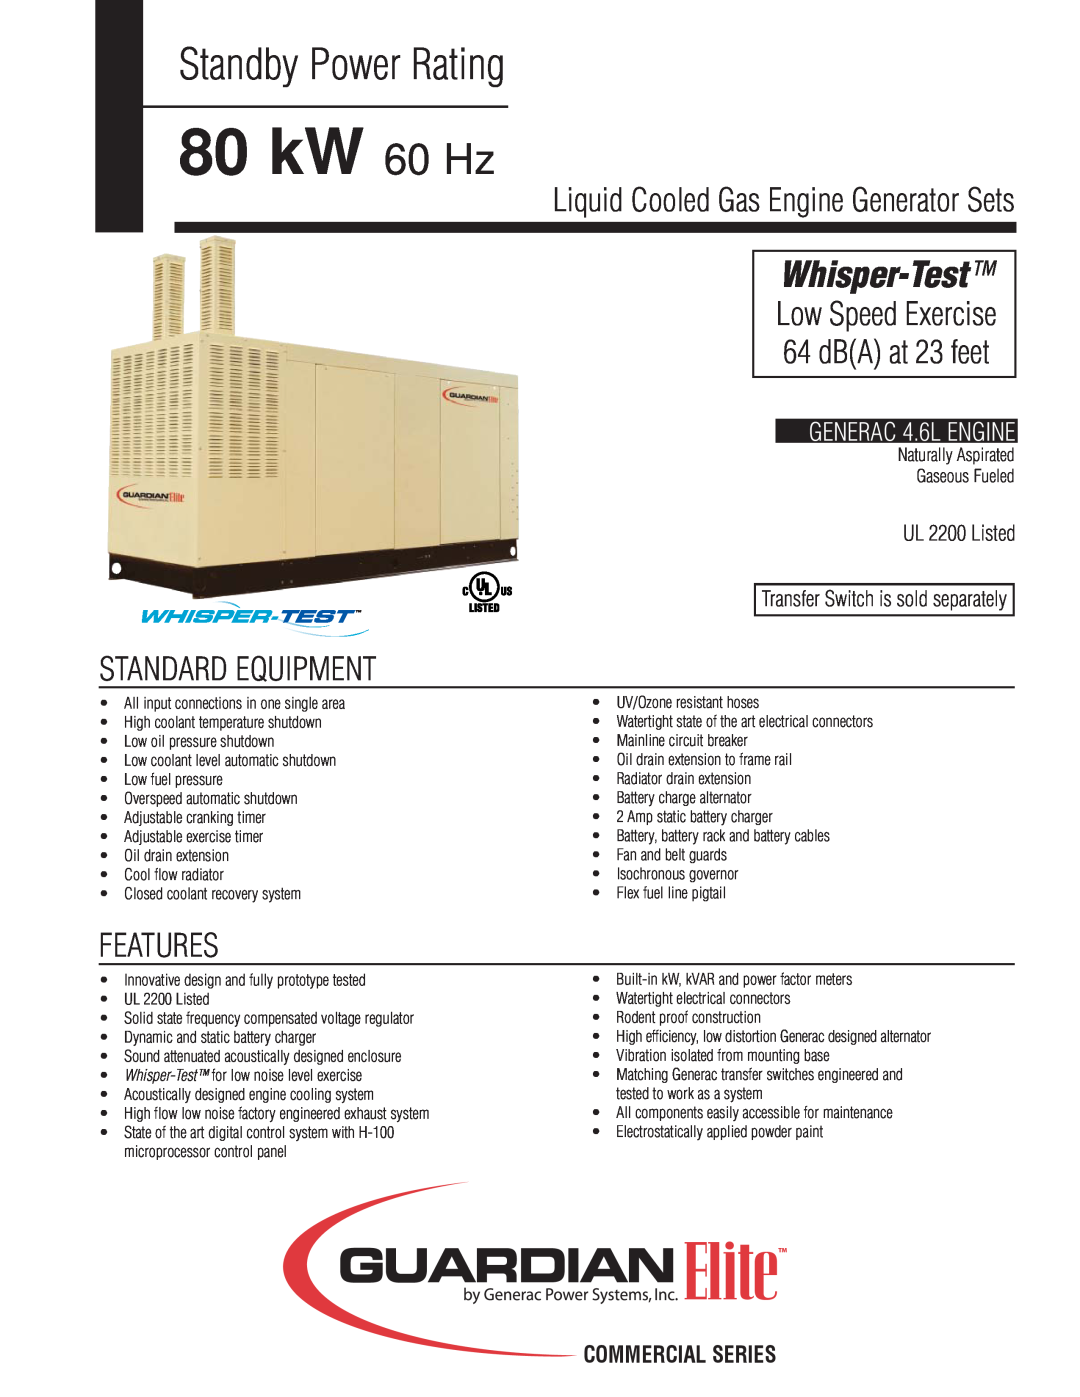 Guardian Technologies 05650 manual Standby Power Rating, 80 kW 60 Hz, Whisper-Test, Low Speed Exercise, dBA at 23 feet 